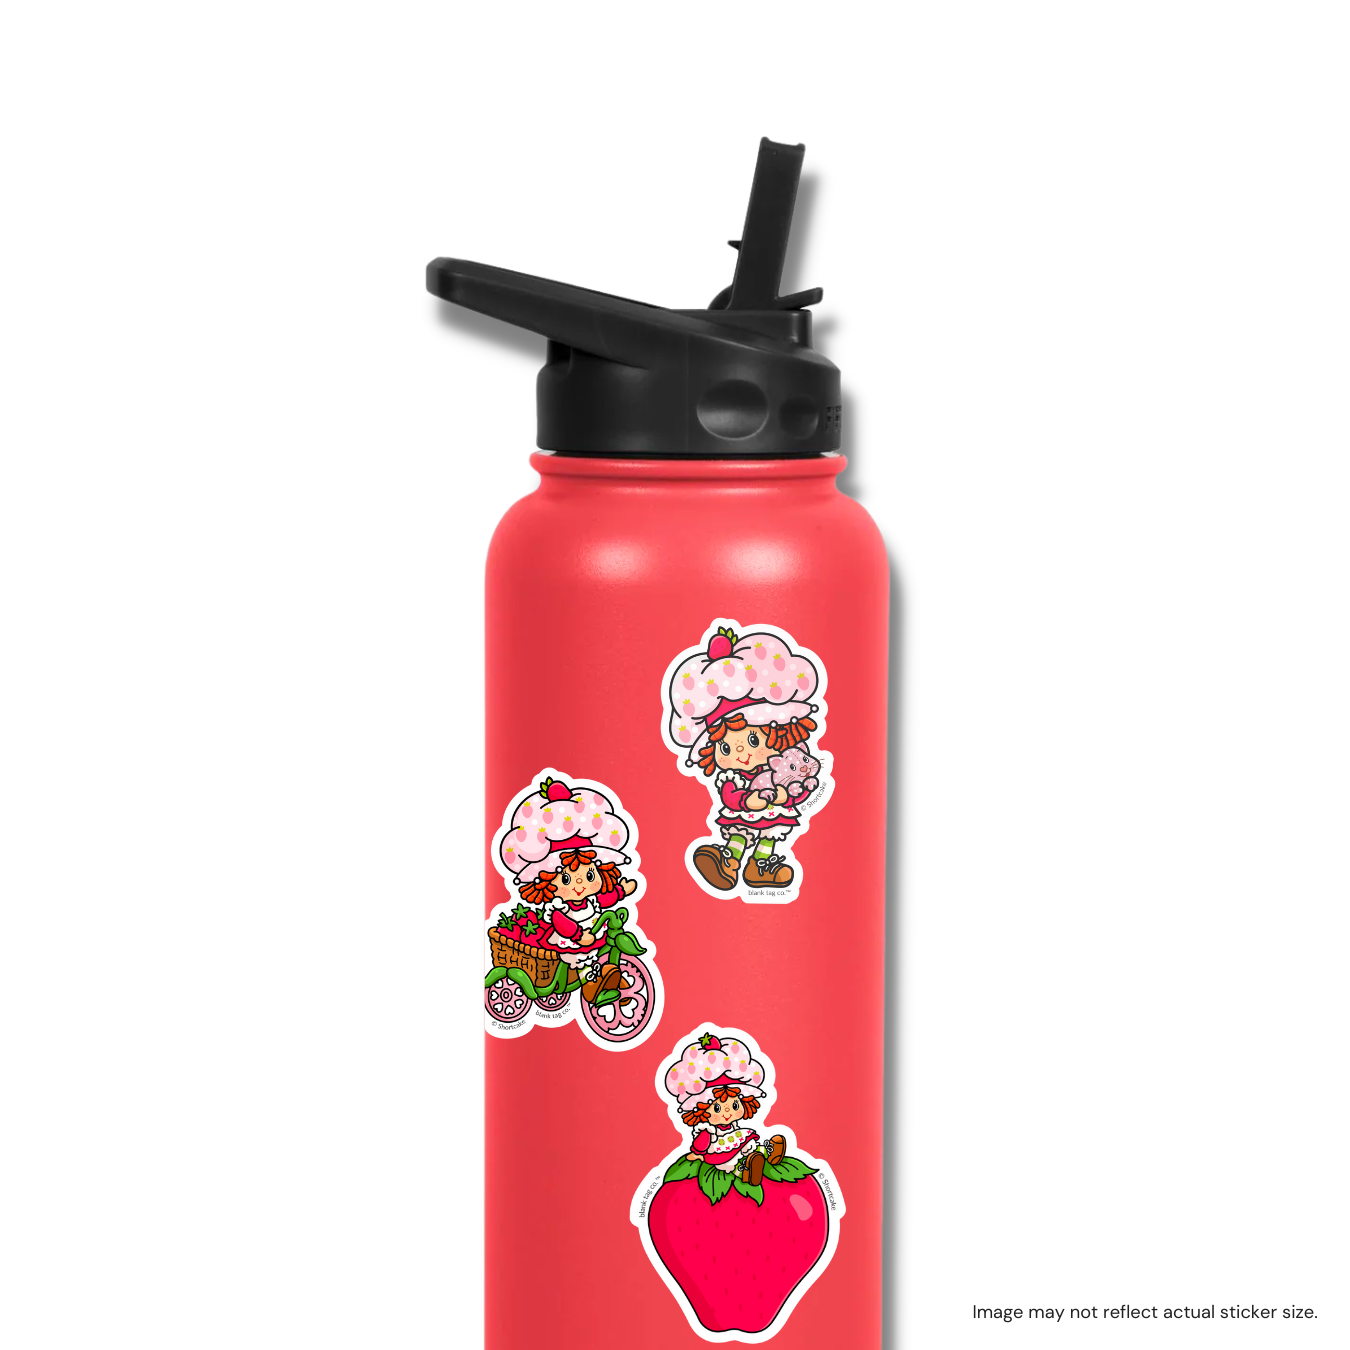 The Strawberry Shortcake Riding A Bicycle Sticker